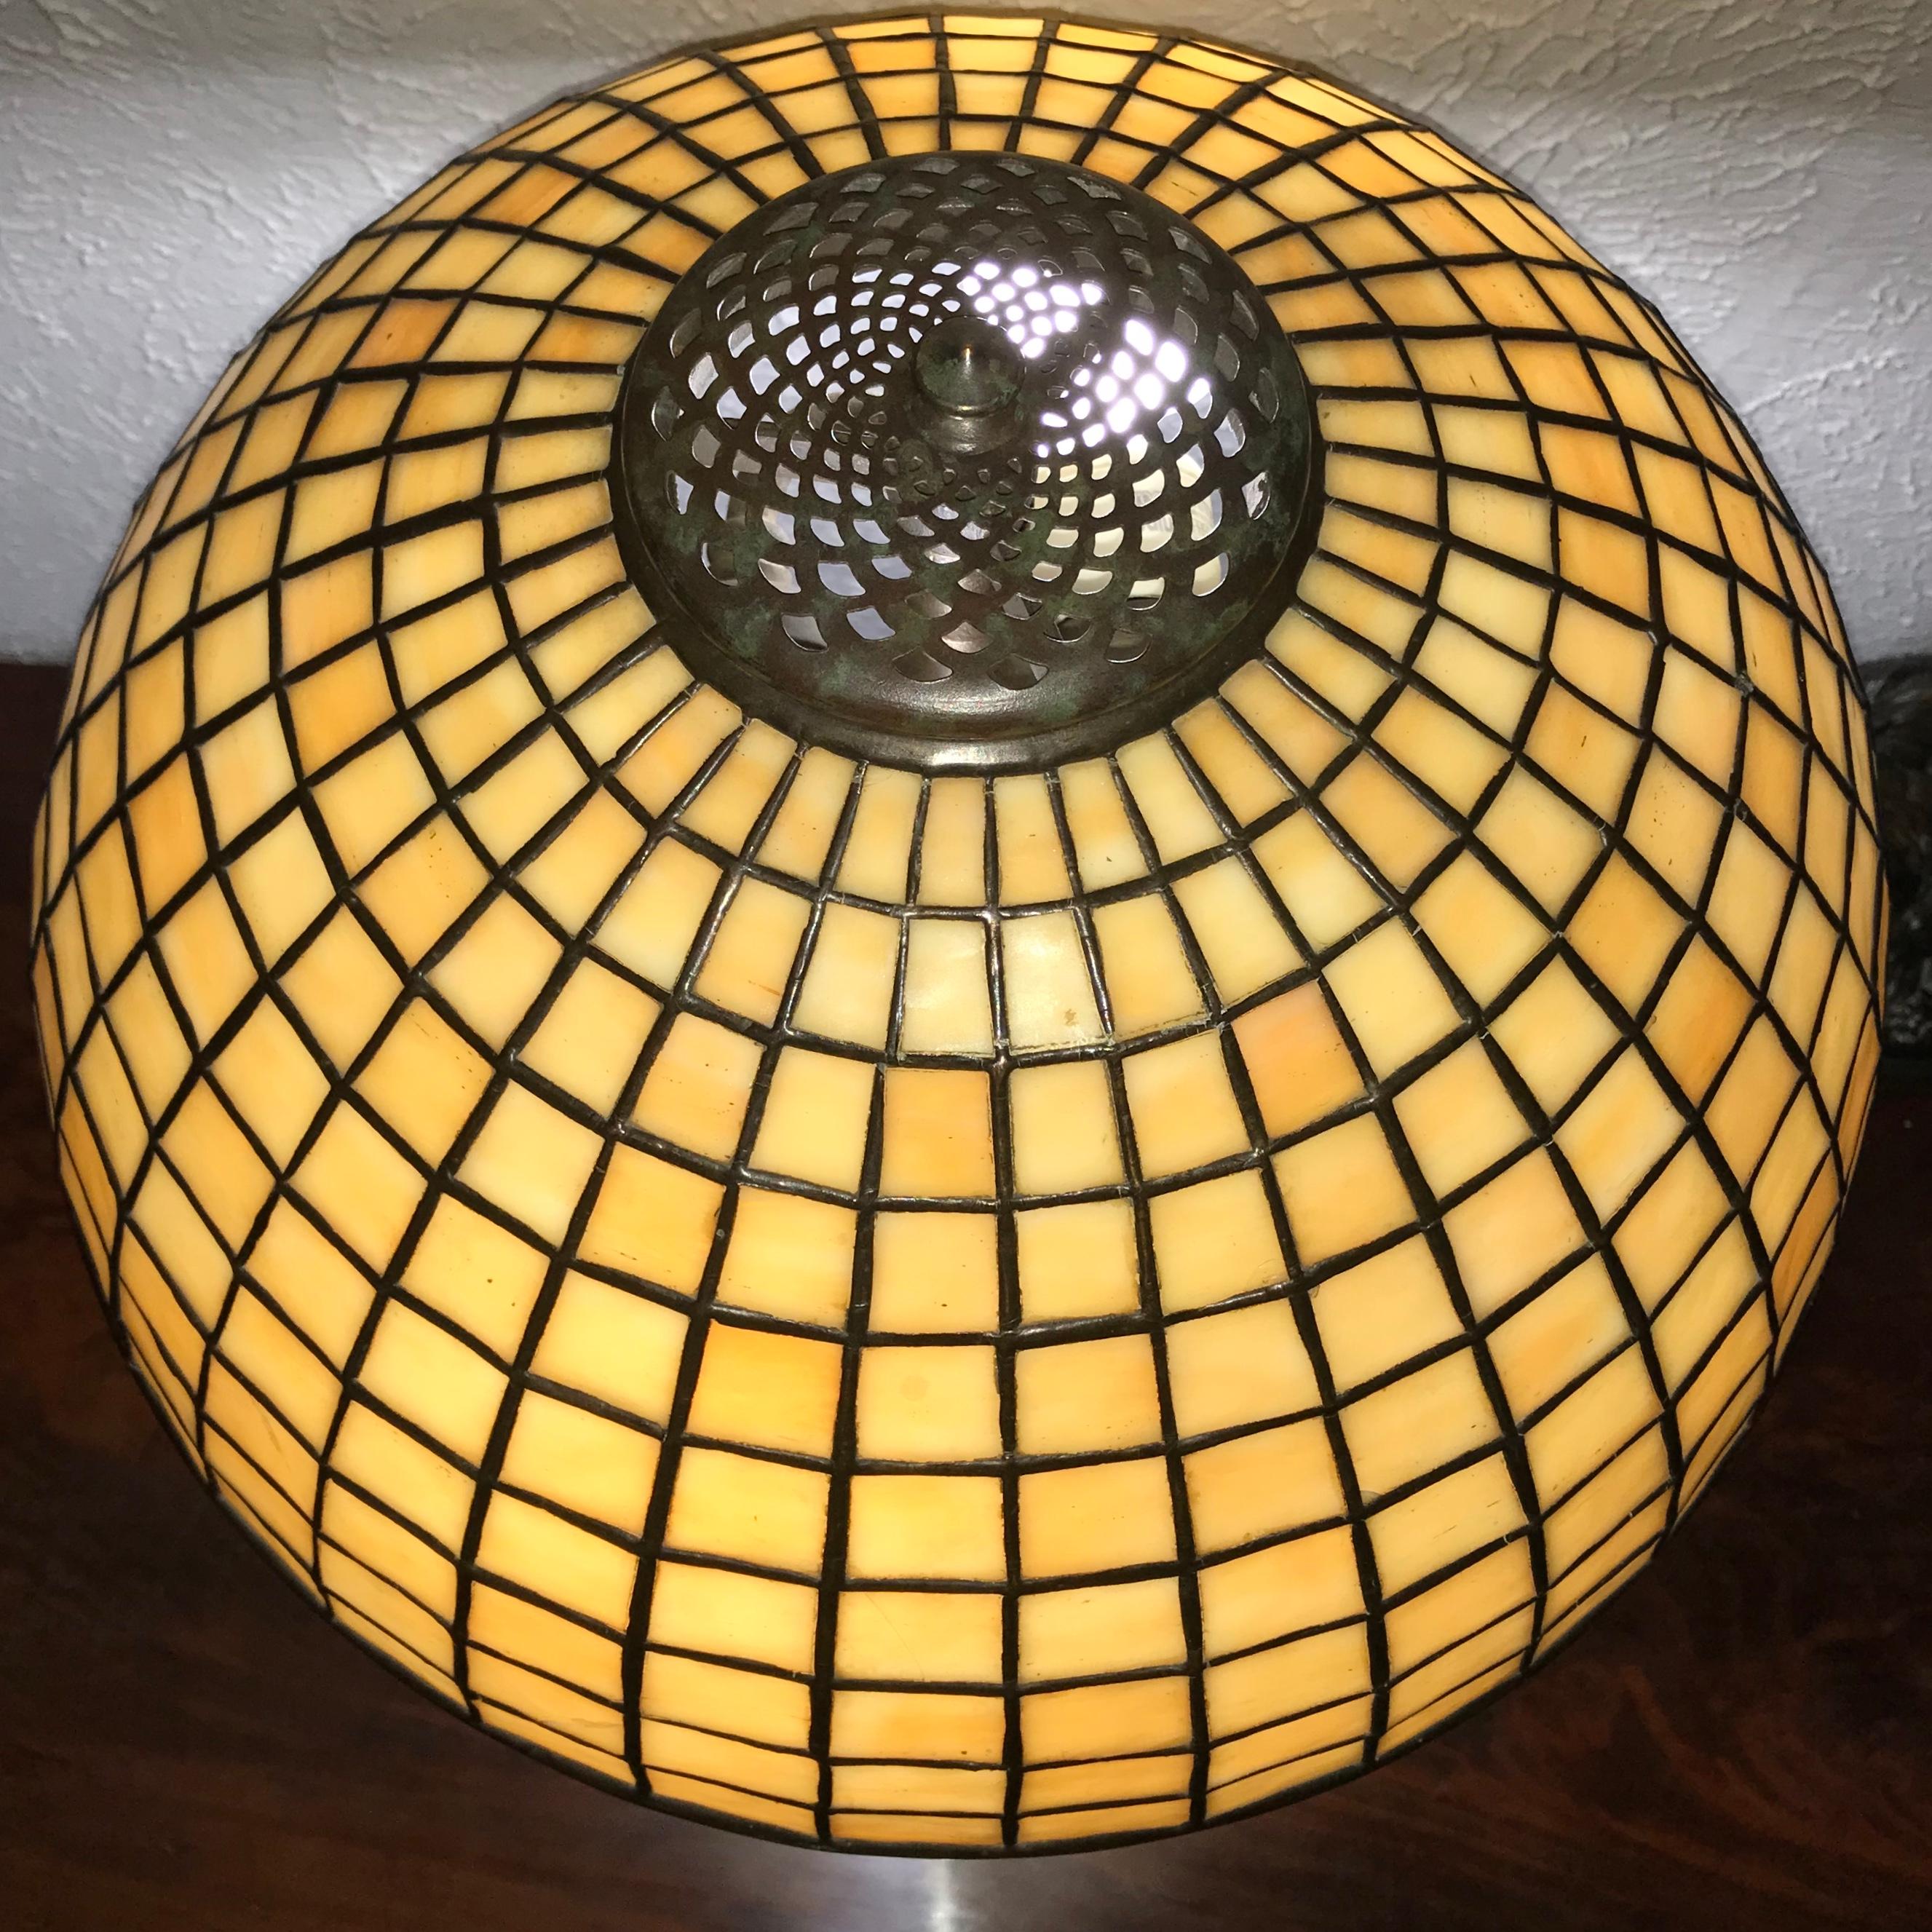 Tiffany Studios leaded glass and bronze geometric table lamp,
circa 1910 Art Nouveau - Art Deco transition.

A delightful Tiffany Studios Lamp for that special place in your home. The size would be perfect for a bedroom or office desk as well as any